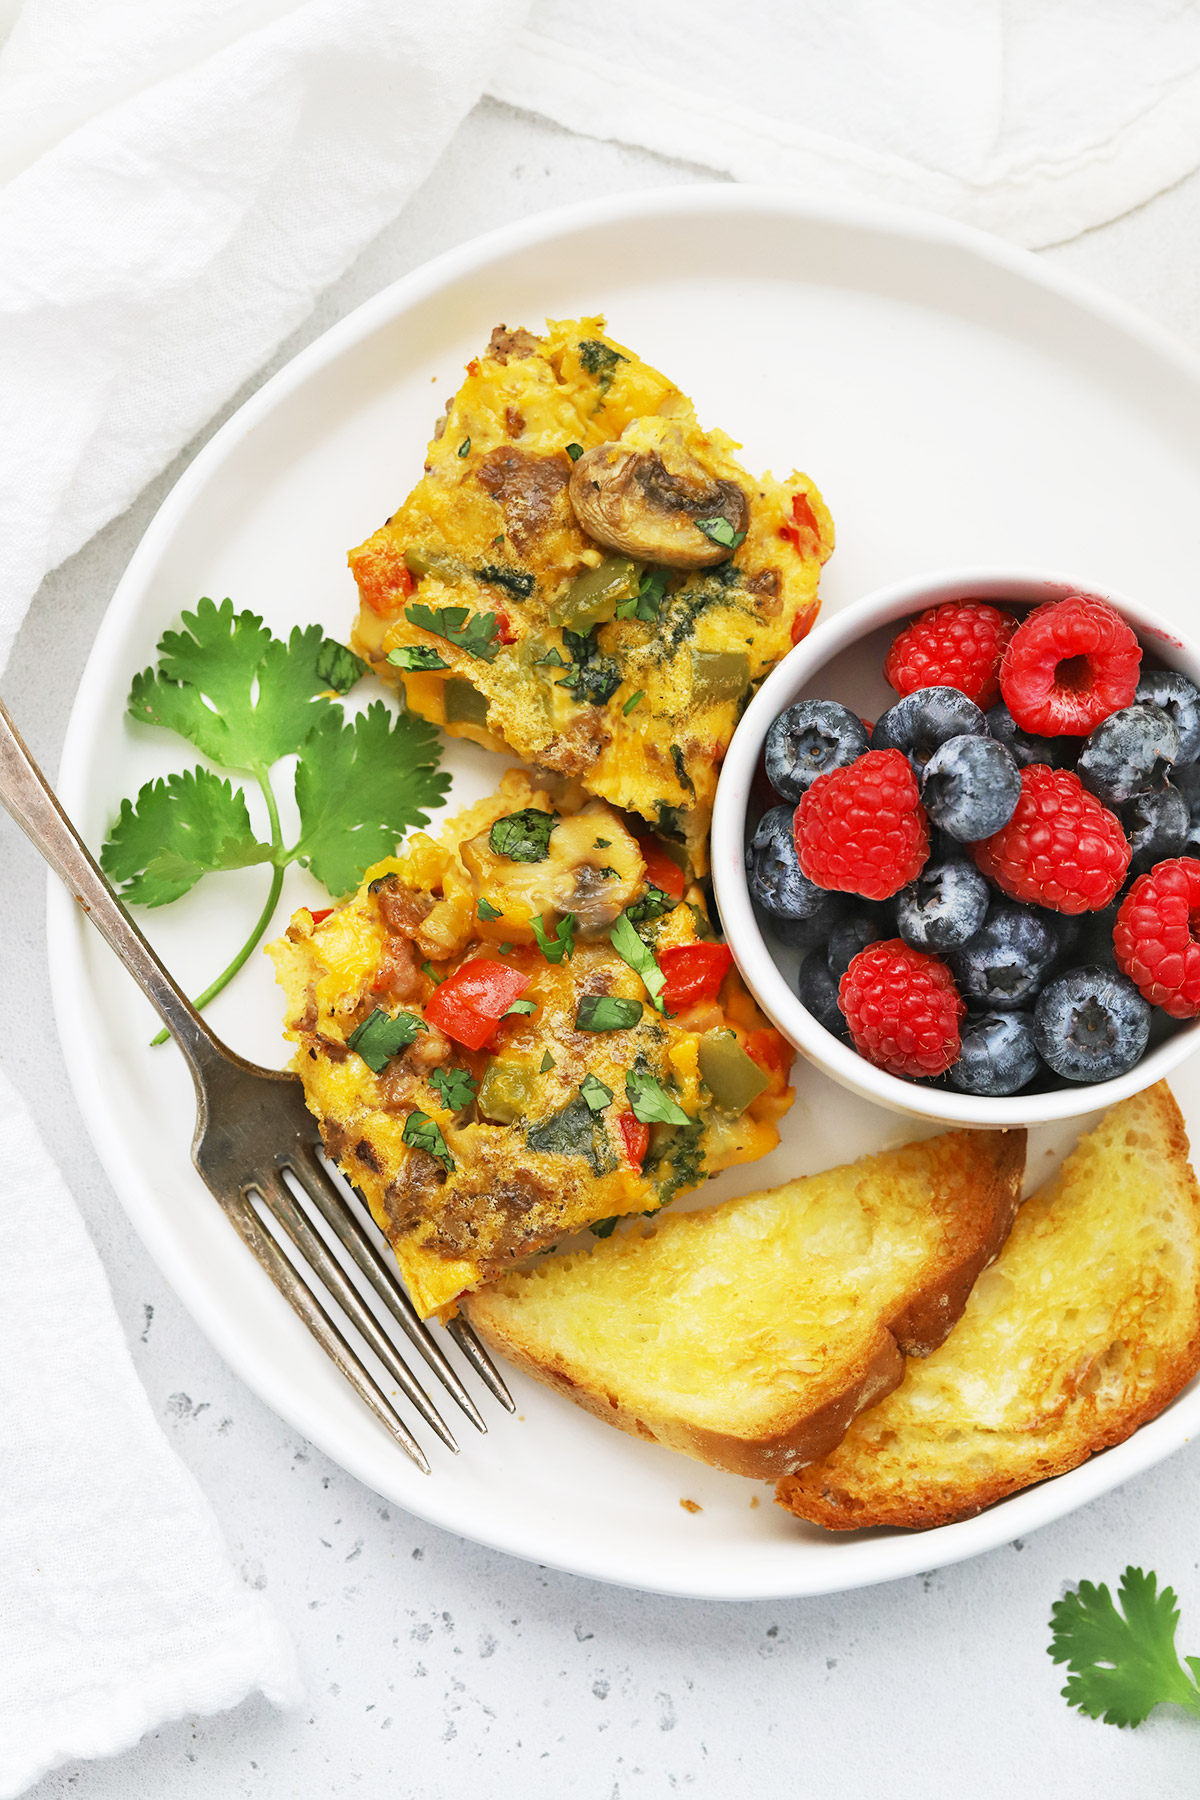 slices of sausage and veggie breakfast bake on a plate with fresh berries + toast